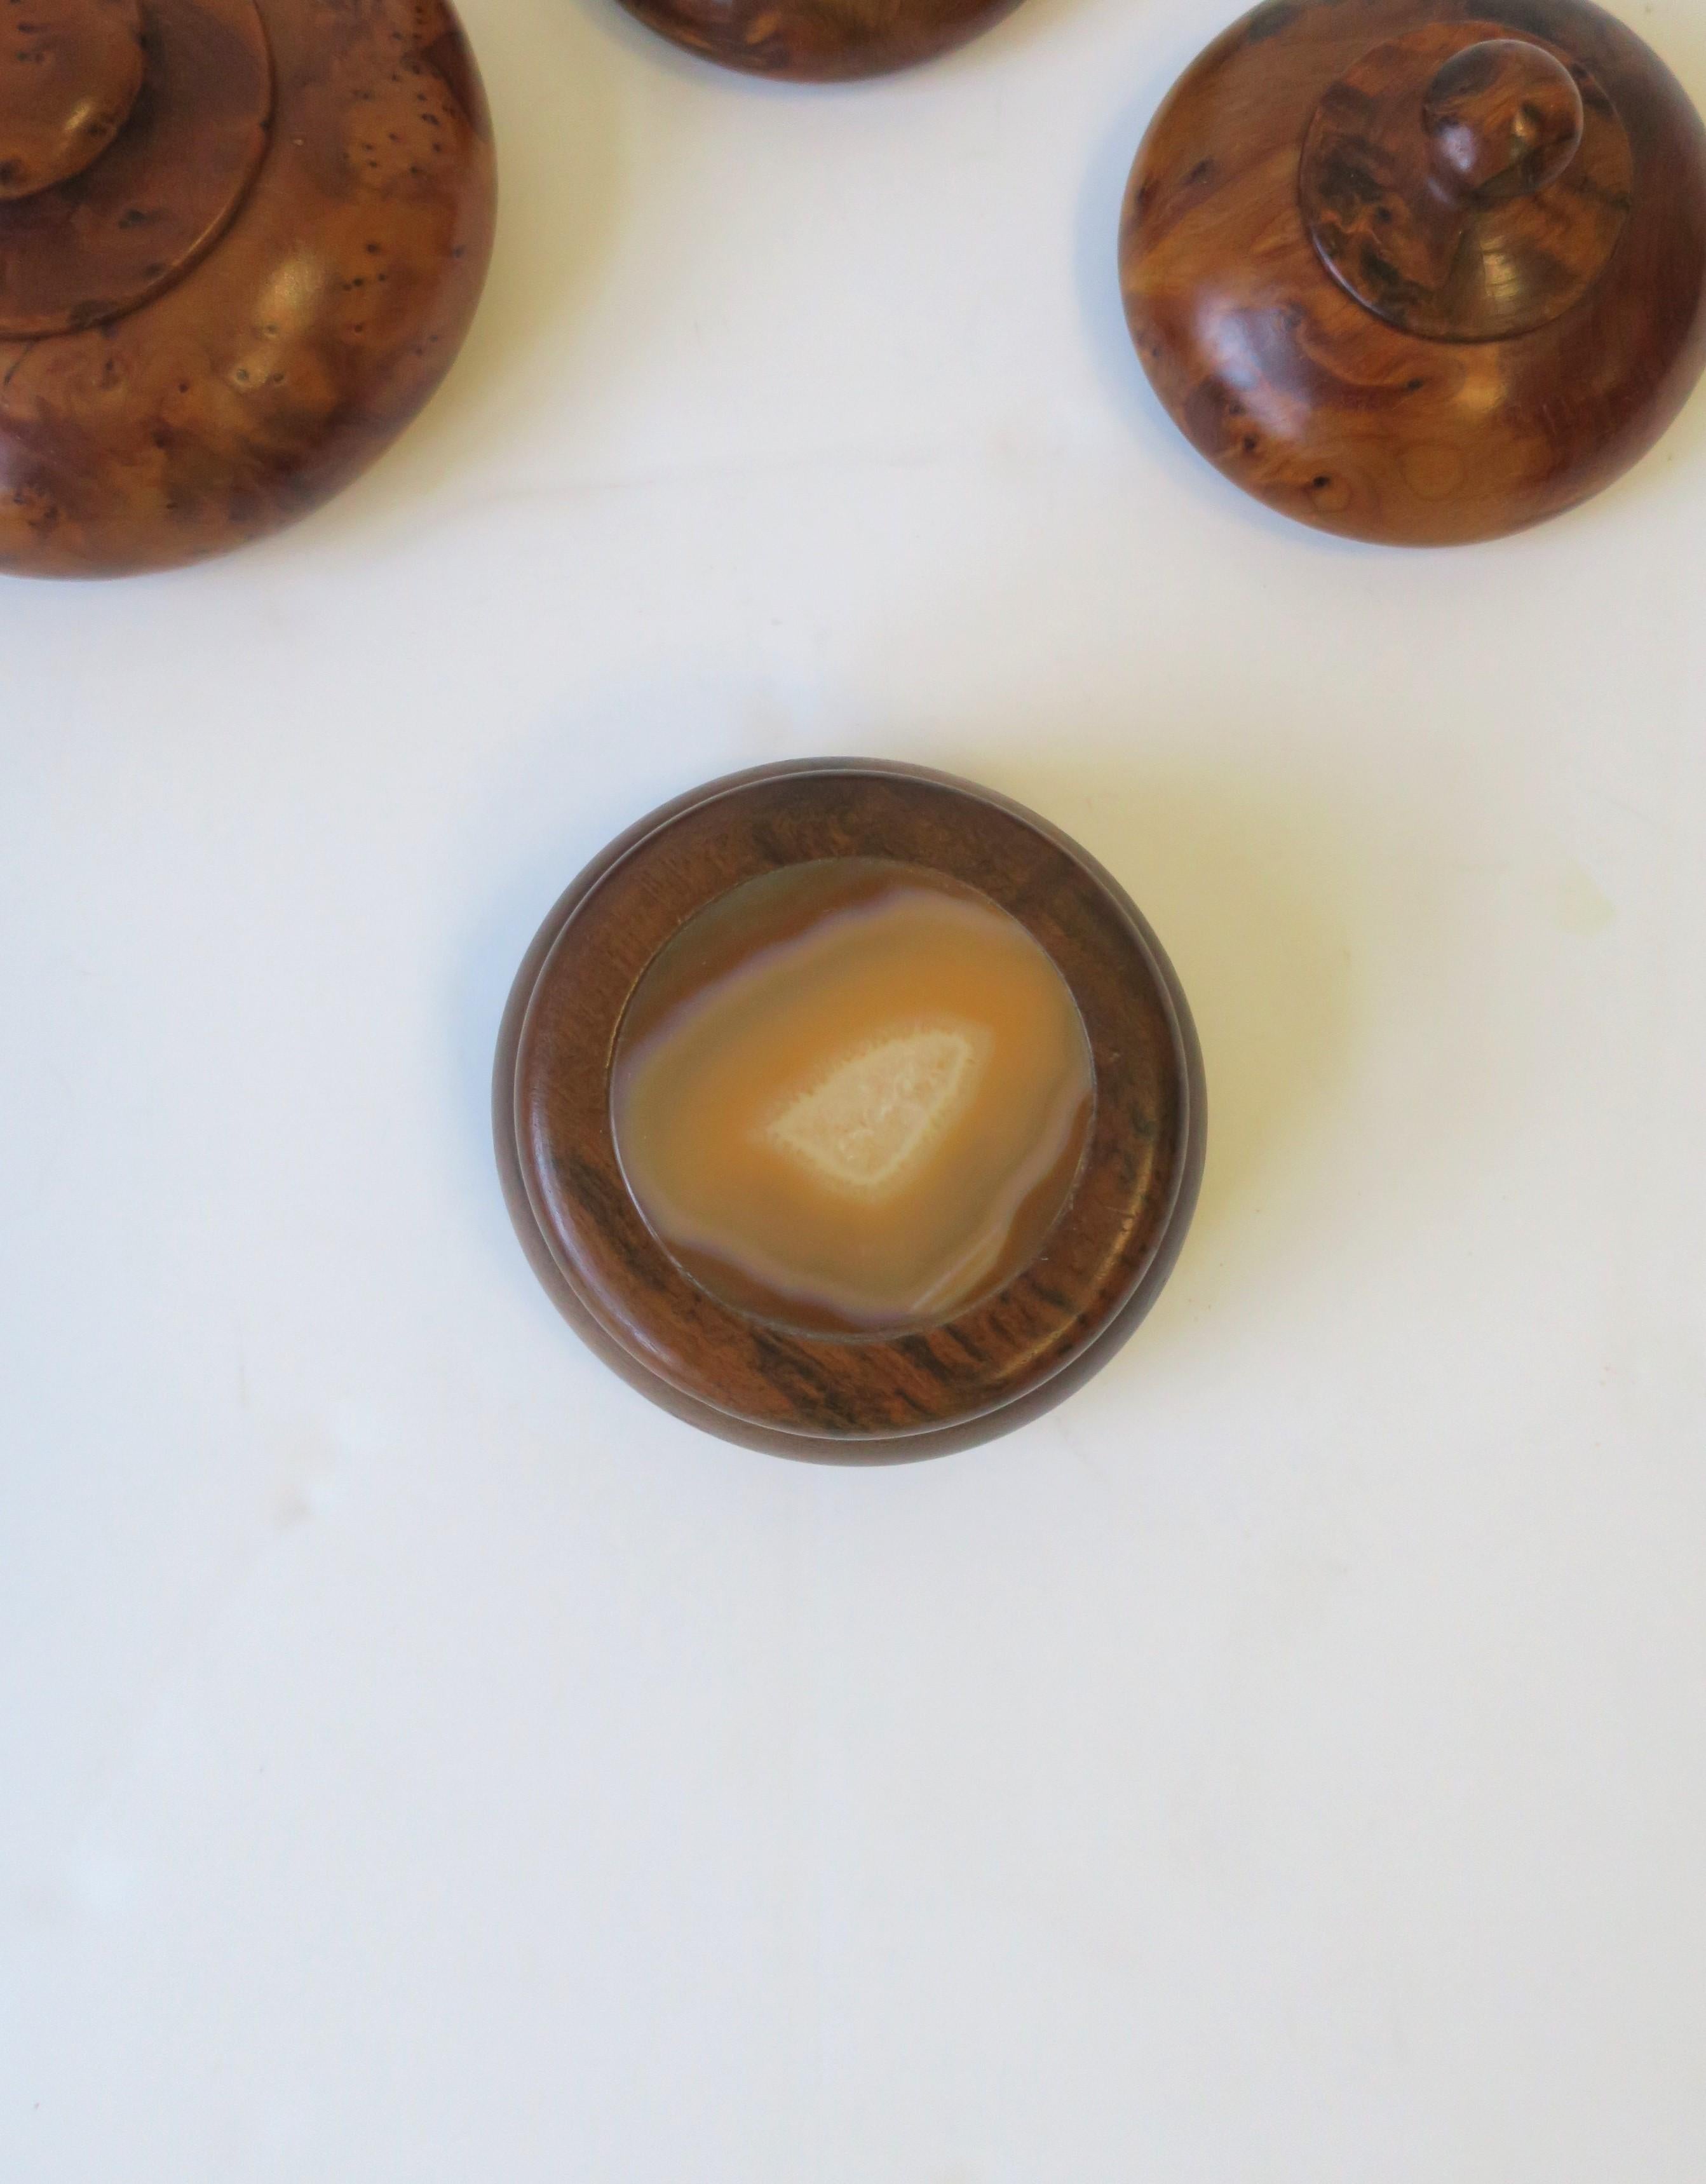 A round Brazilian agate onyx and wood trinket or jewelry box, in the Modern style Post-Modern period, circa-late 20th century, 1980s early 1990s, Brazil. Box has a rich brown wood with onyx agate hues in tan/neutral and white. Piece would suffice